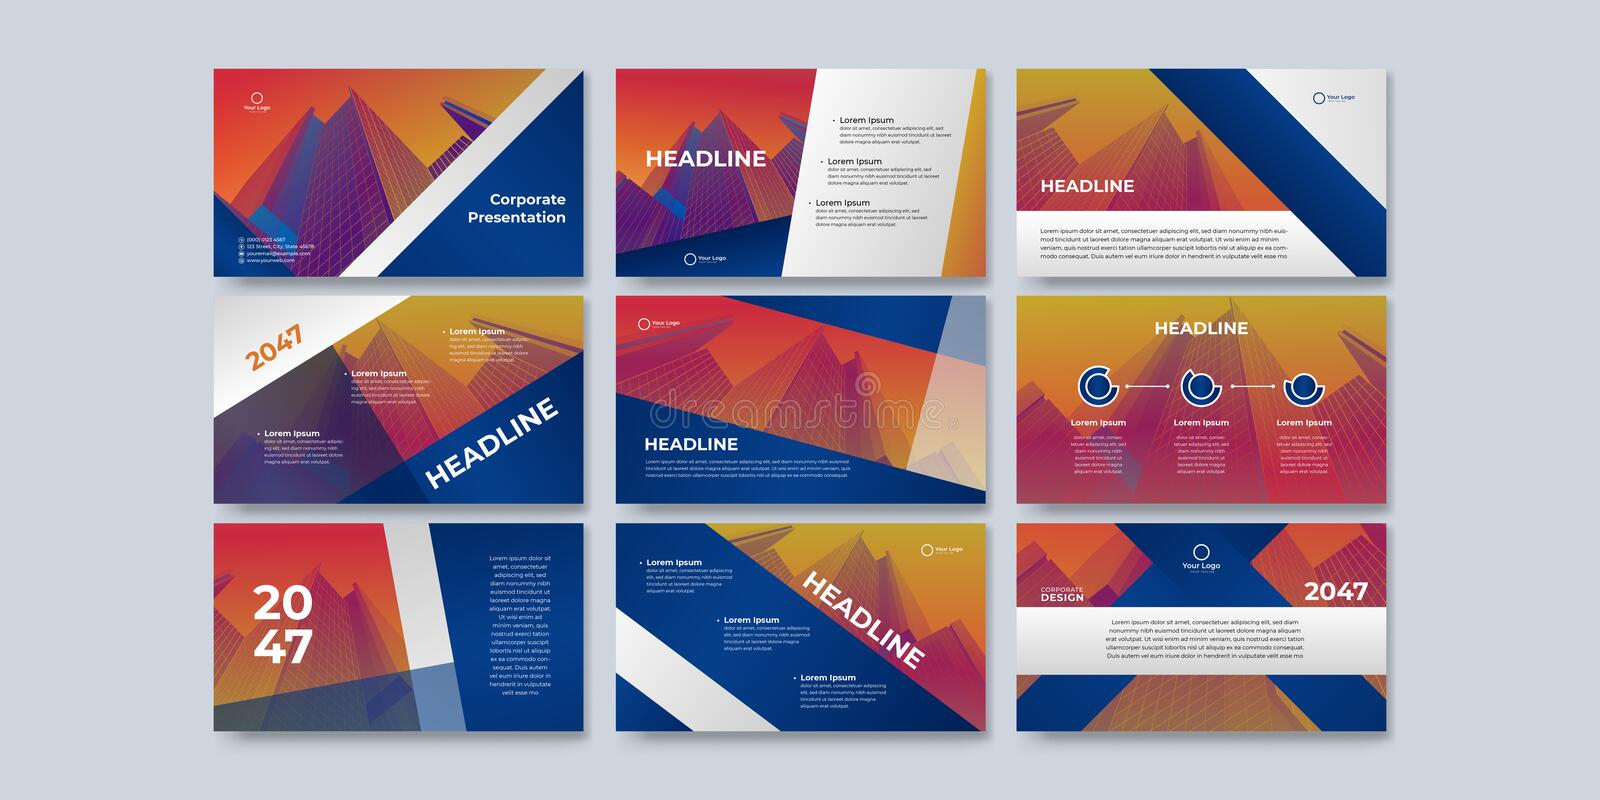 Dark Blue Presentation Templates Set for Business and Construction  In Keynote Brochure Template